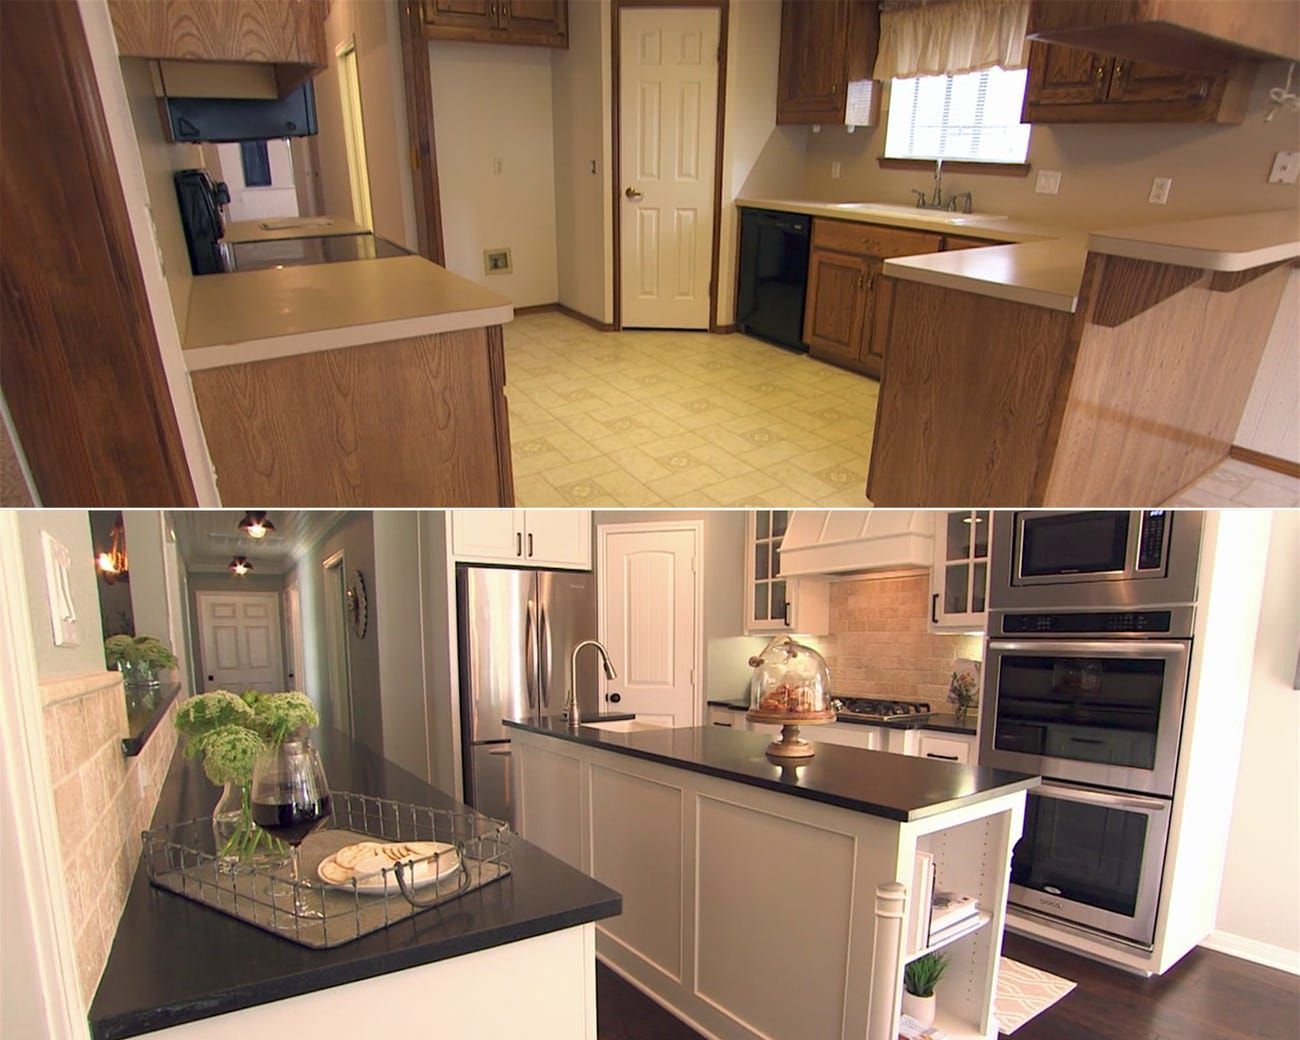 31 before-and-after photos of Chip and Joanna's house flips on 'Fixer Upper' - 31 before-and-after photos of Chip and Joanna's house flips on 'Fixer Upper' -   17 diy House fixer upper ideas